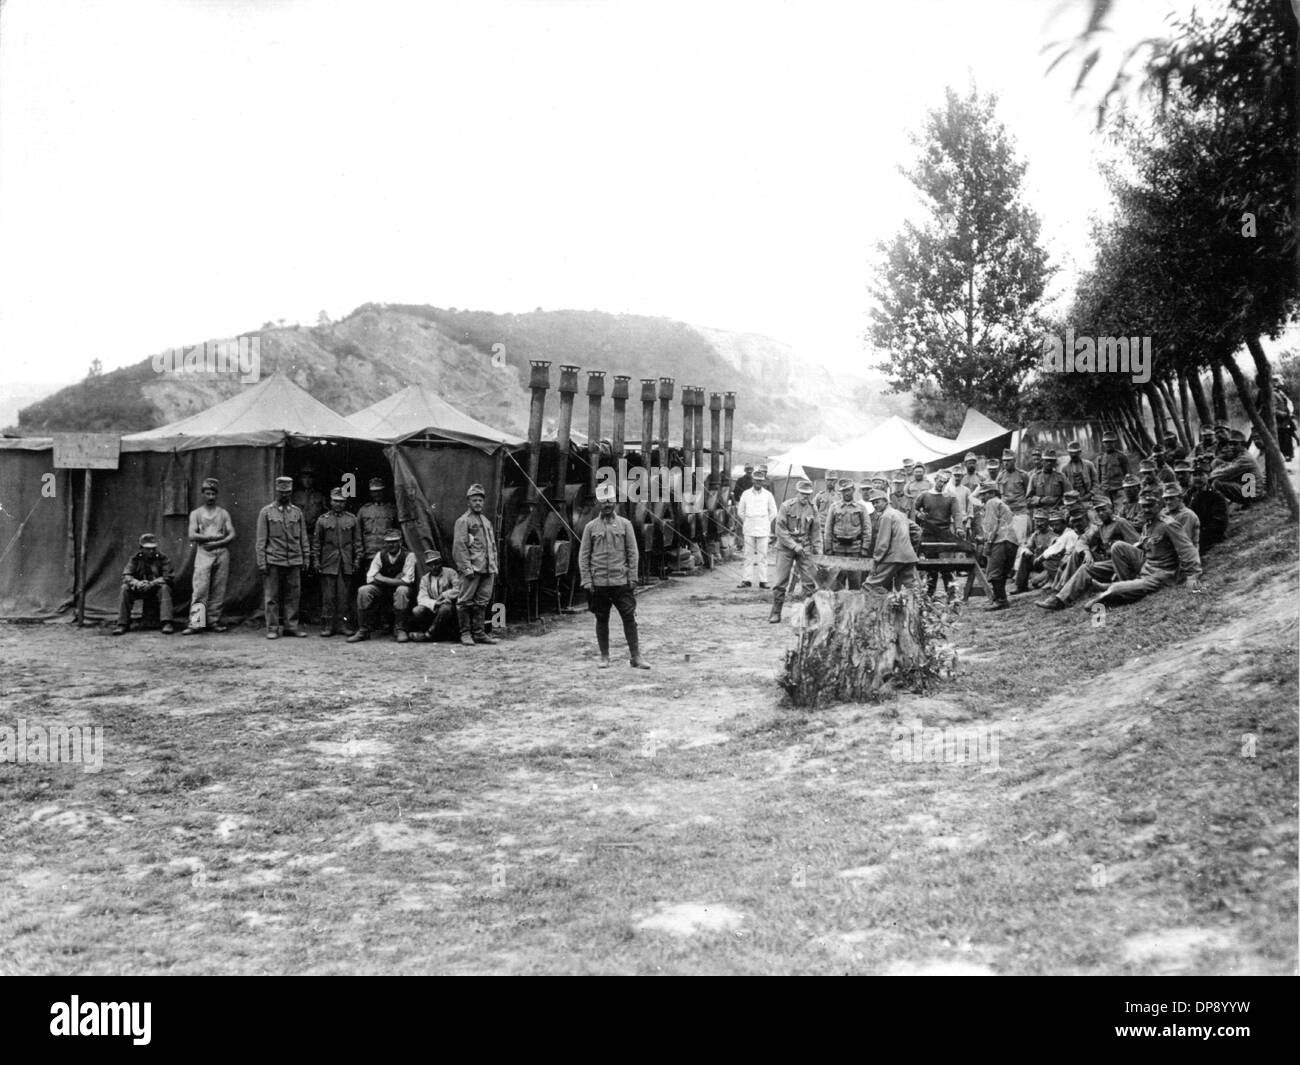 Soldiers of the Austrian-Hungarian army in front of a mobile bakery during a stop in Russia (undated). The deadly shots by Serbian nationalists on the Austrian heir to the throne Franz Ferdinand on the 28th of June in 1914 in Sarajevo caused the outbreak of the Great War, later to be called World War I, in August 1914. The Central Powers, namely Germany, Austria-Hungary and as well later the Ottoman Empire (Turkey) and Bulgaria against the Triple Entente, consisting of Great Britain, France and Russia, as well as numerous allies. The sad result of World War I, which ended with the defeat of Stock Photo